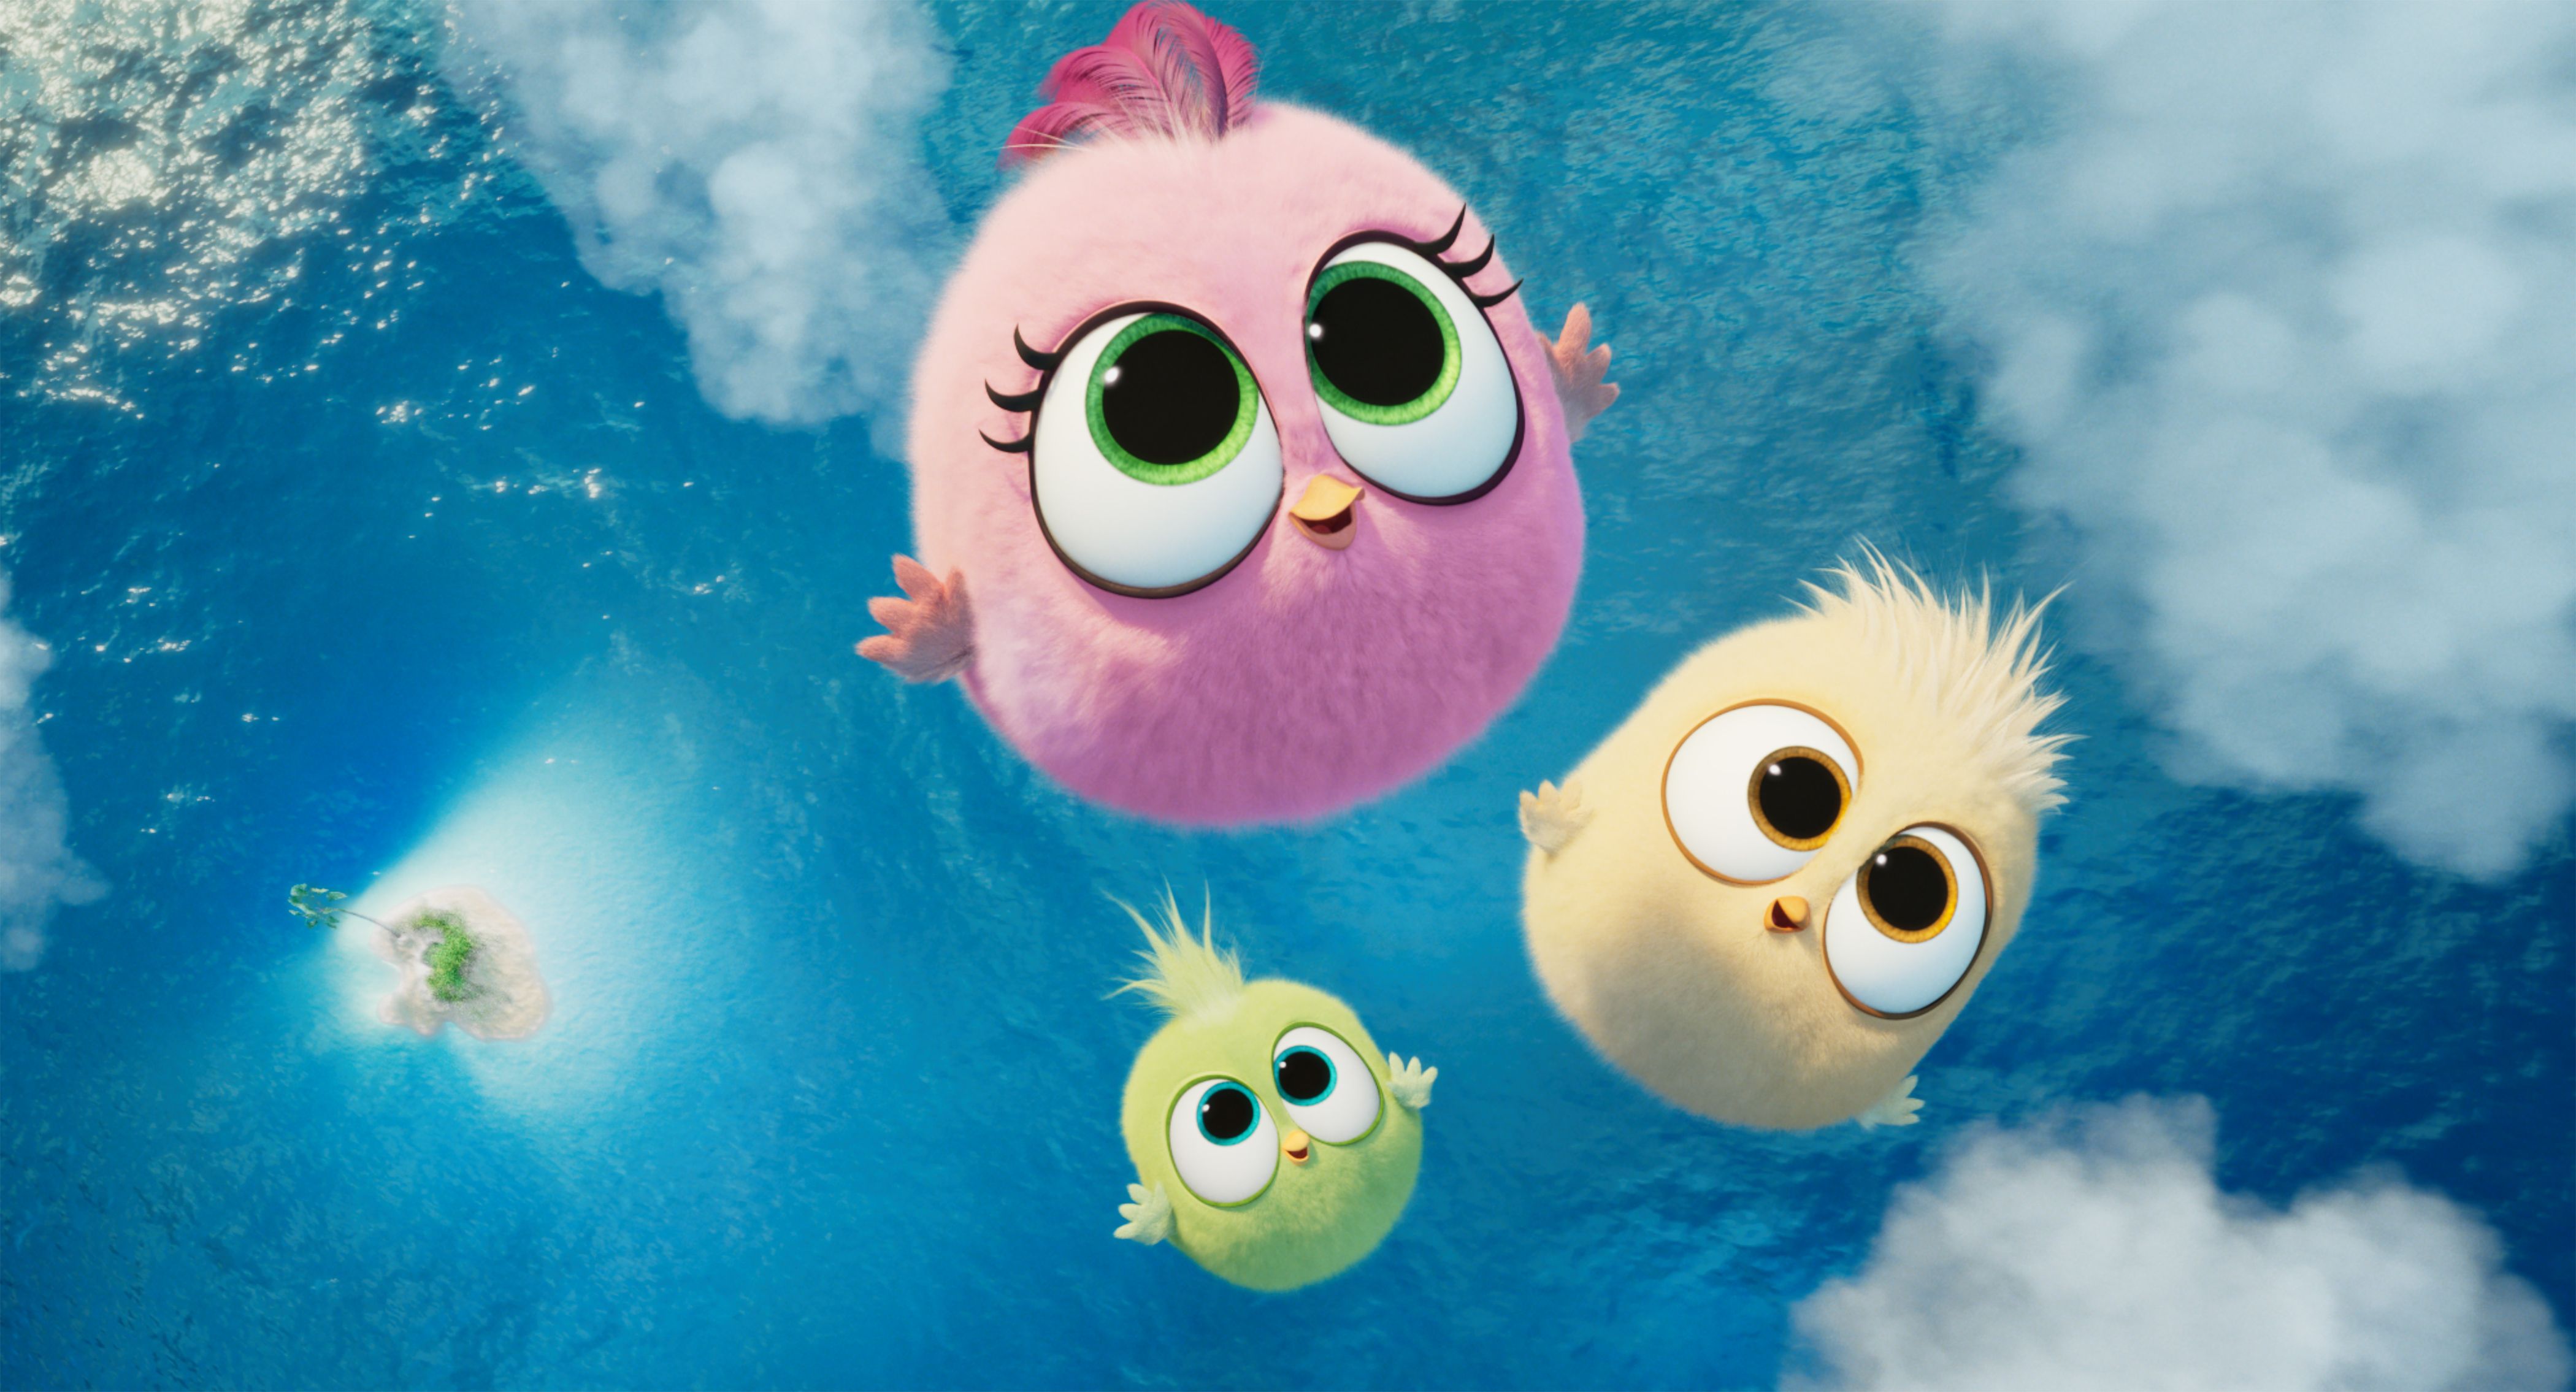 Zoe, Vivi, And Sam Sam In Angry Birds 2 Wallpaper, HD Movies 4K Wallpaper, Image, Photo And Background